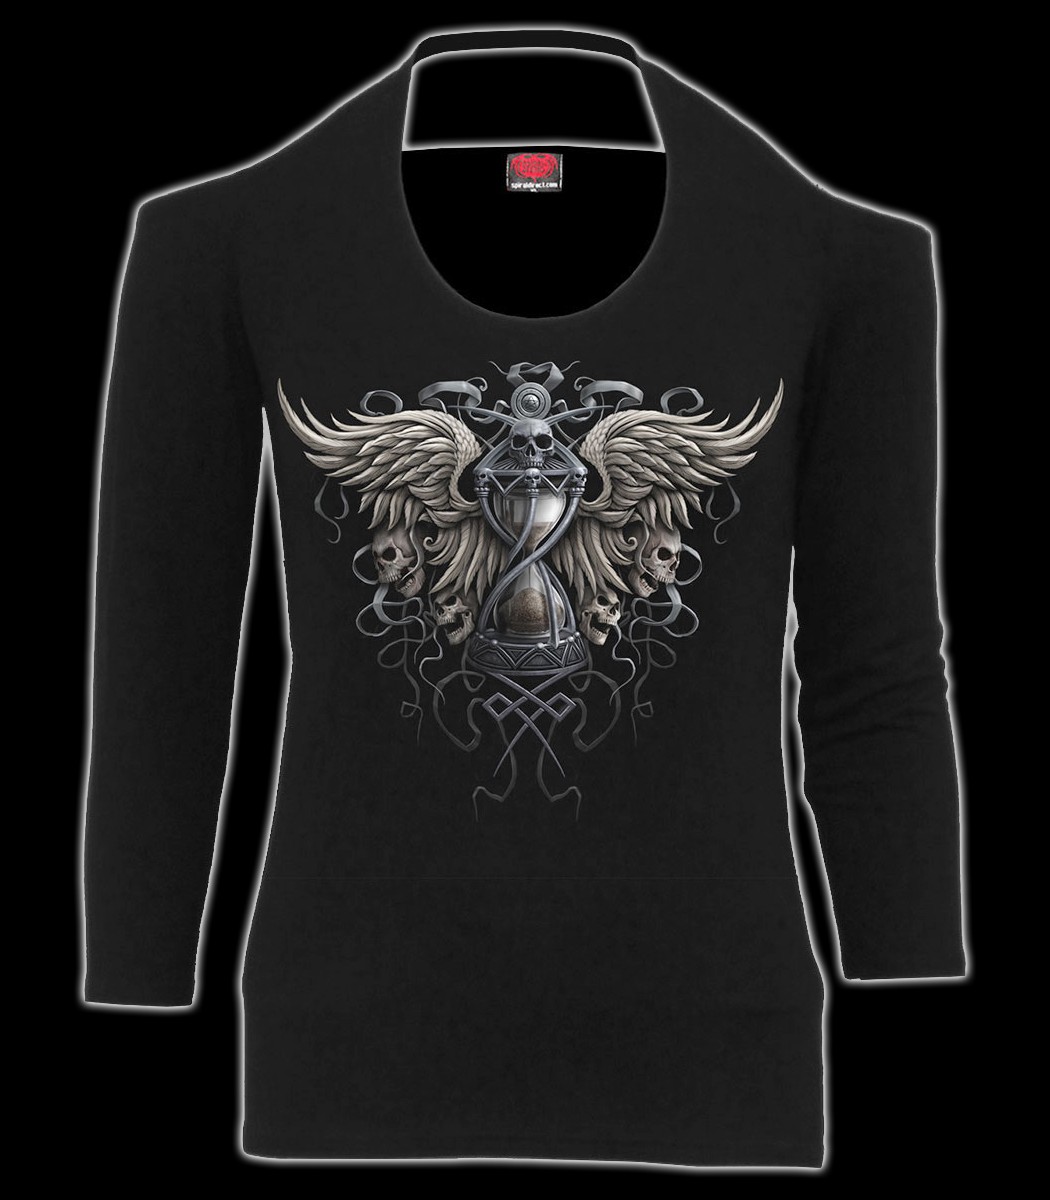 Darkness - Gothic Womens Longsleeve Top